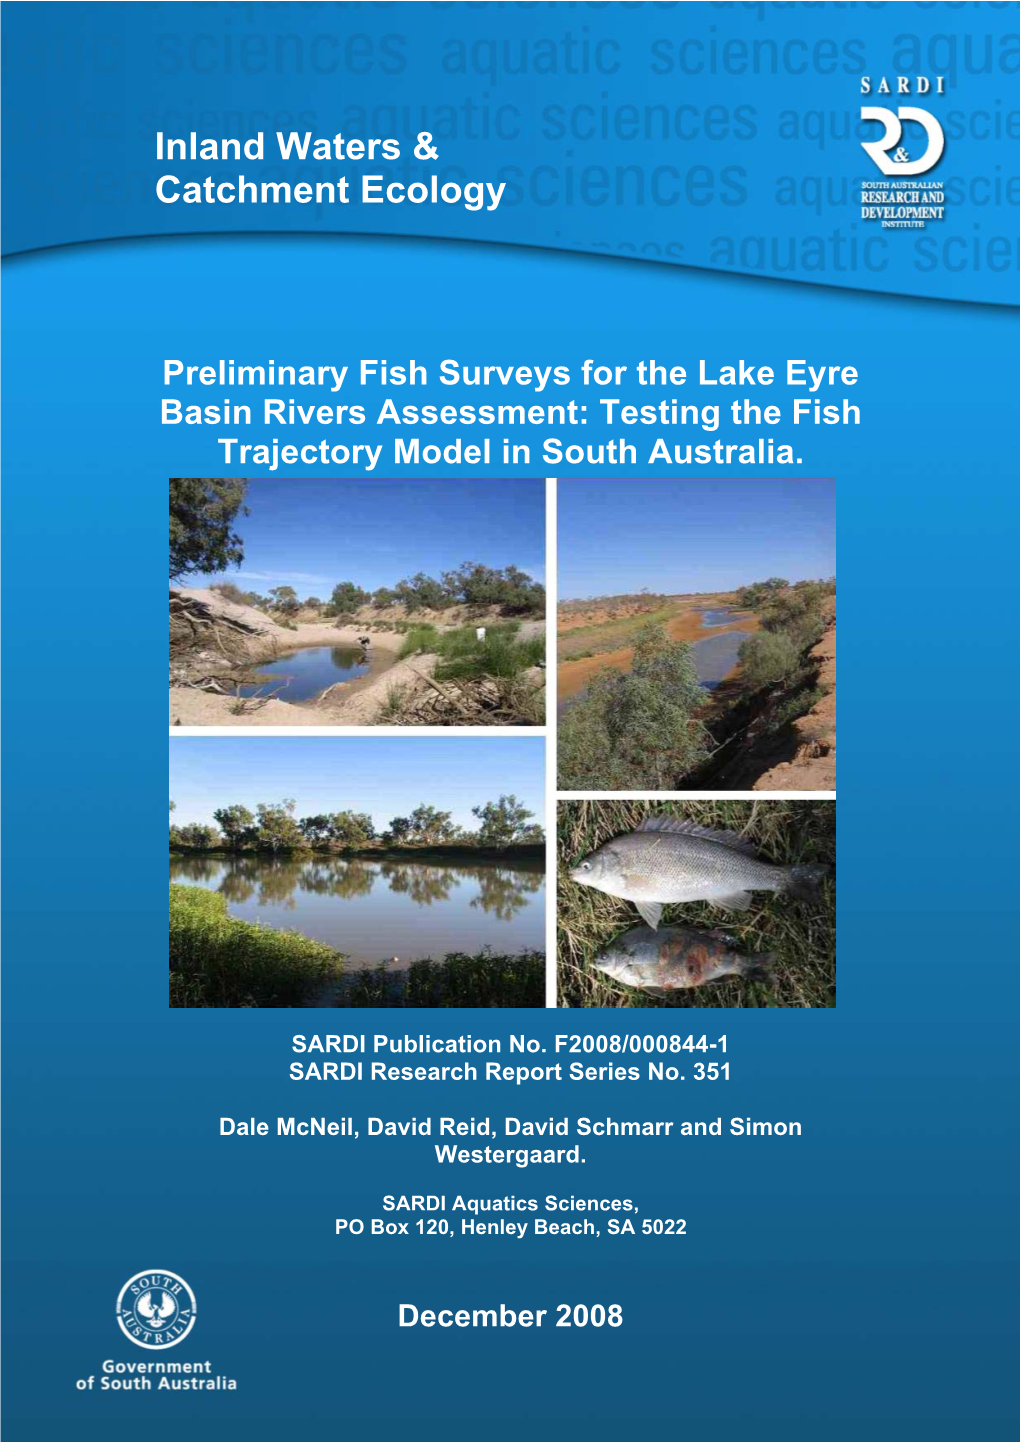 Preliminary Fish Surveys for the Lake Eyre Basin Rivers Assessment: Testing the Fish Trajectory Model in South Australia